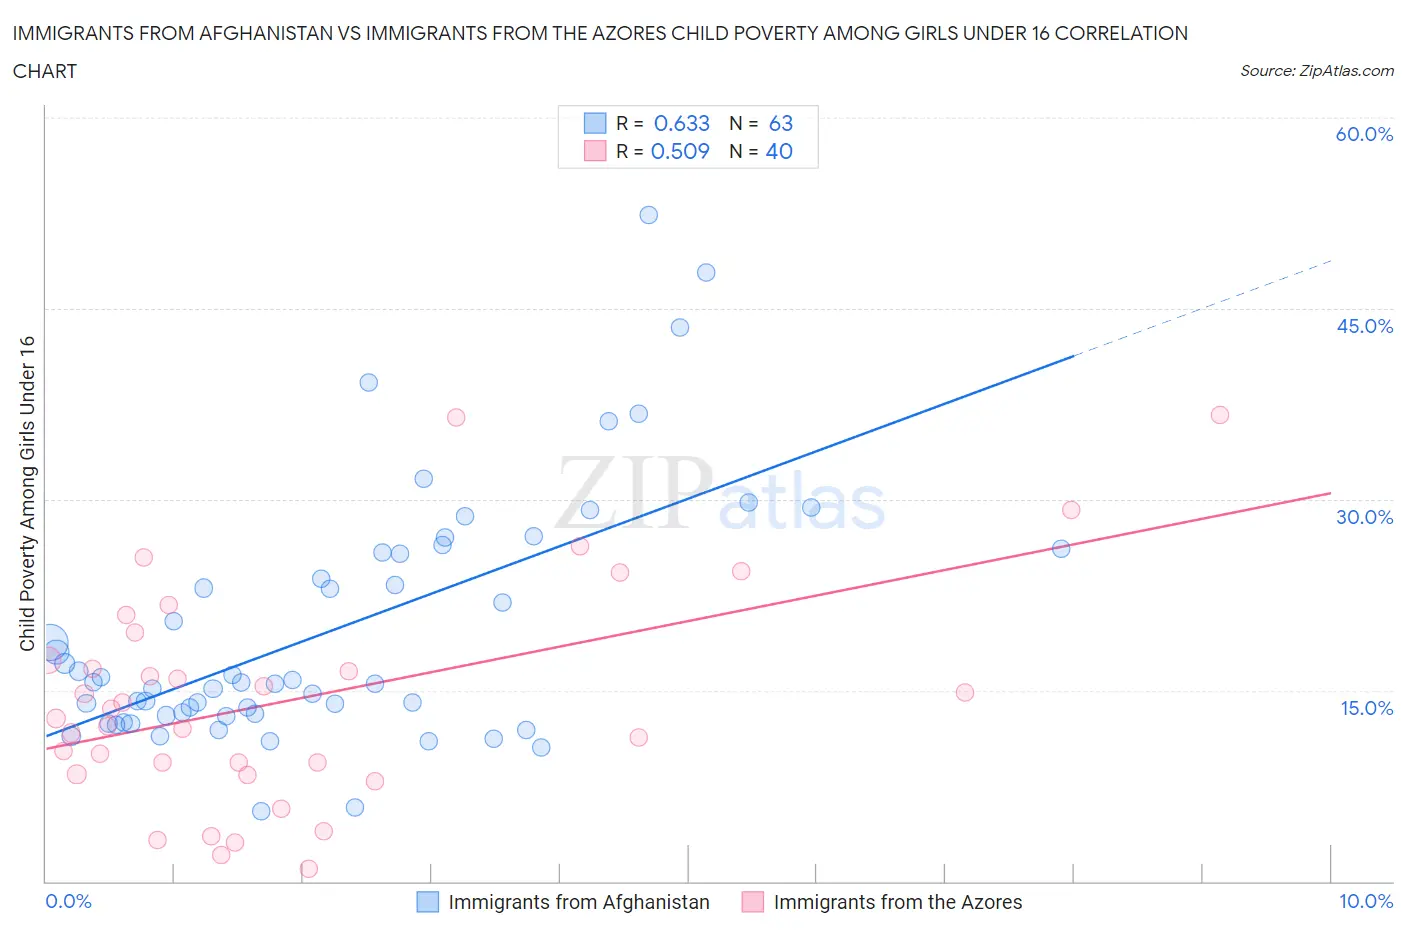 Immigrants from Afghanistan vs Immigrants from the Azores Child Poverty Among Girls Under 16